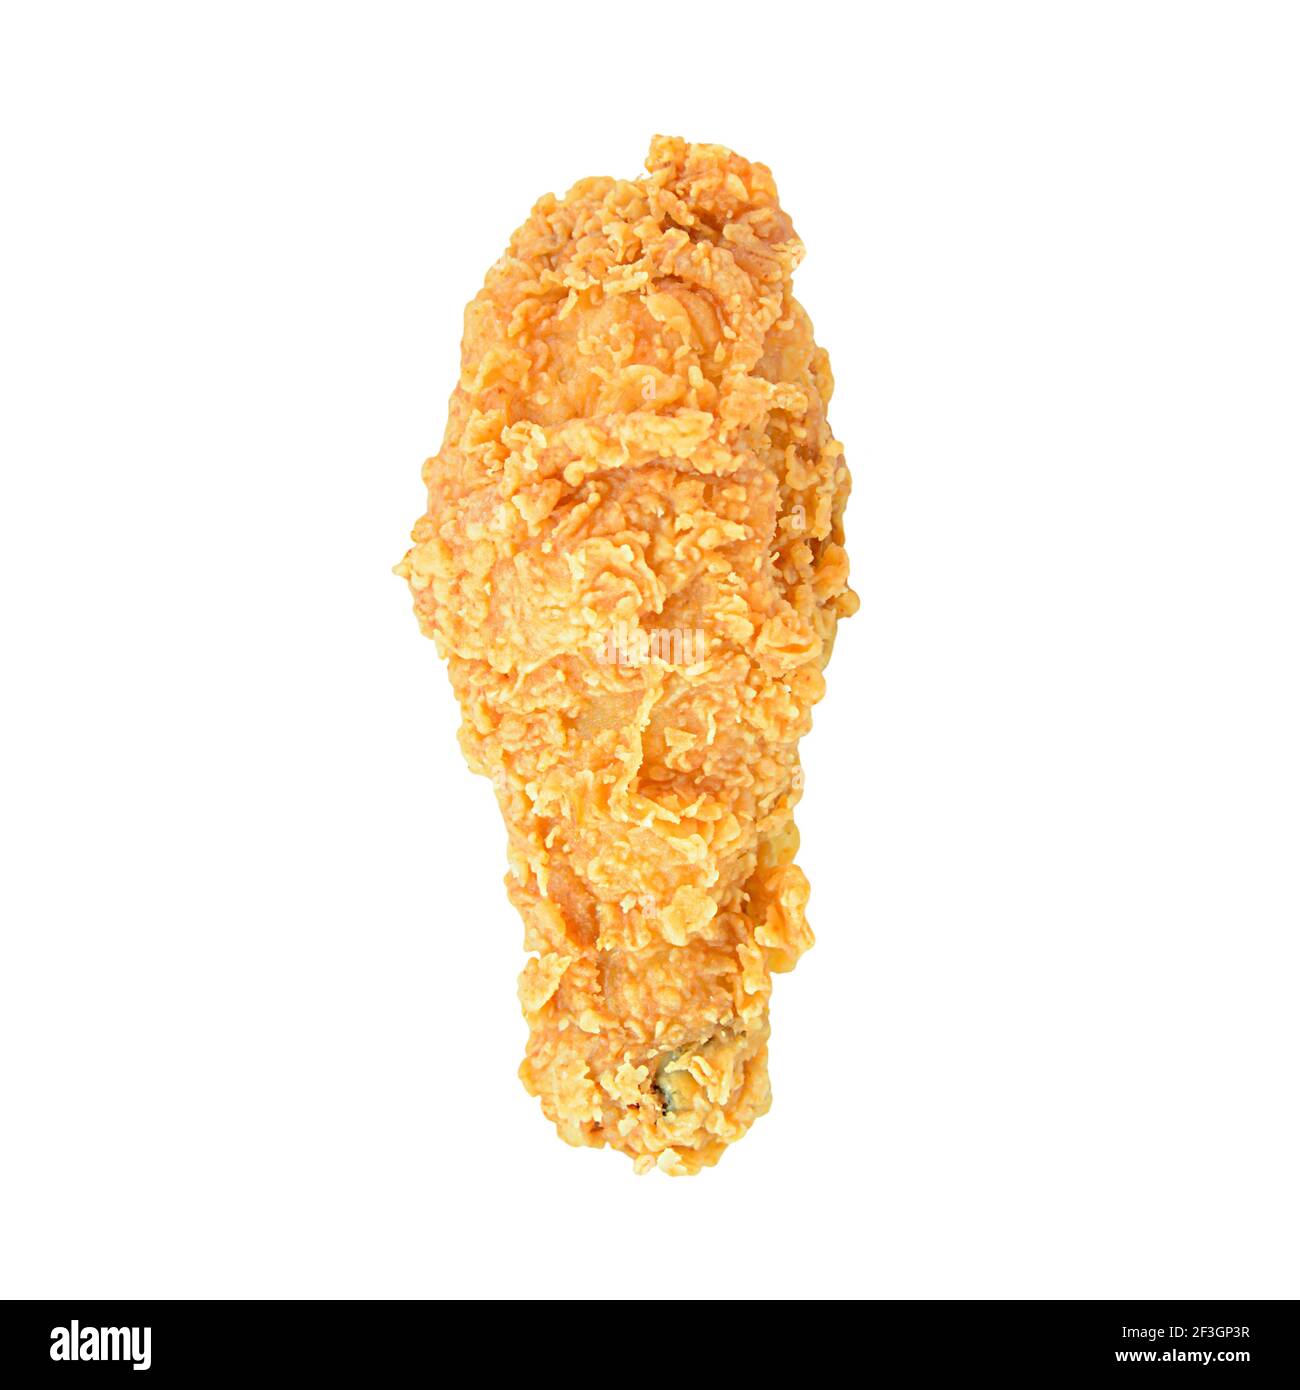 Fried chicken leg or drumstick isolated on white background Stock Photo